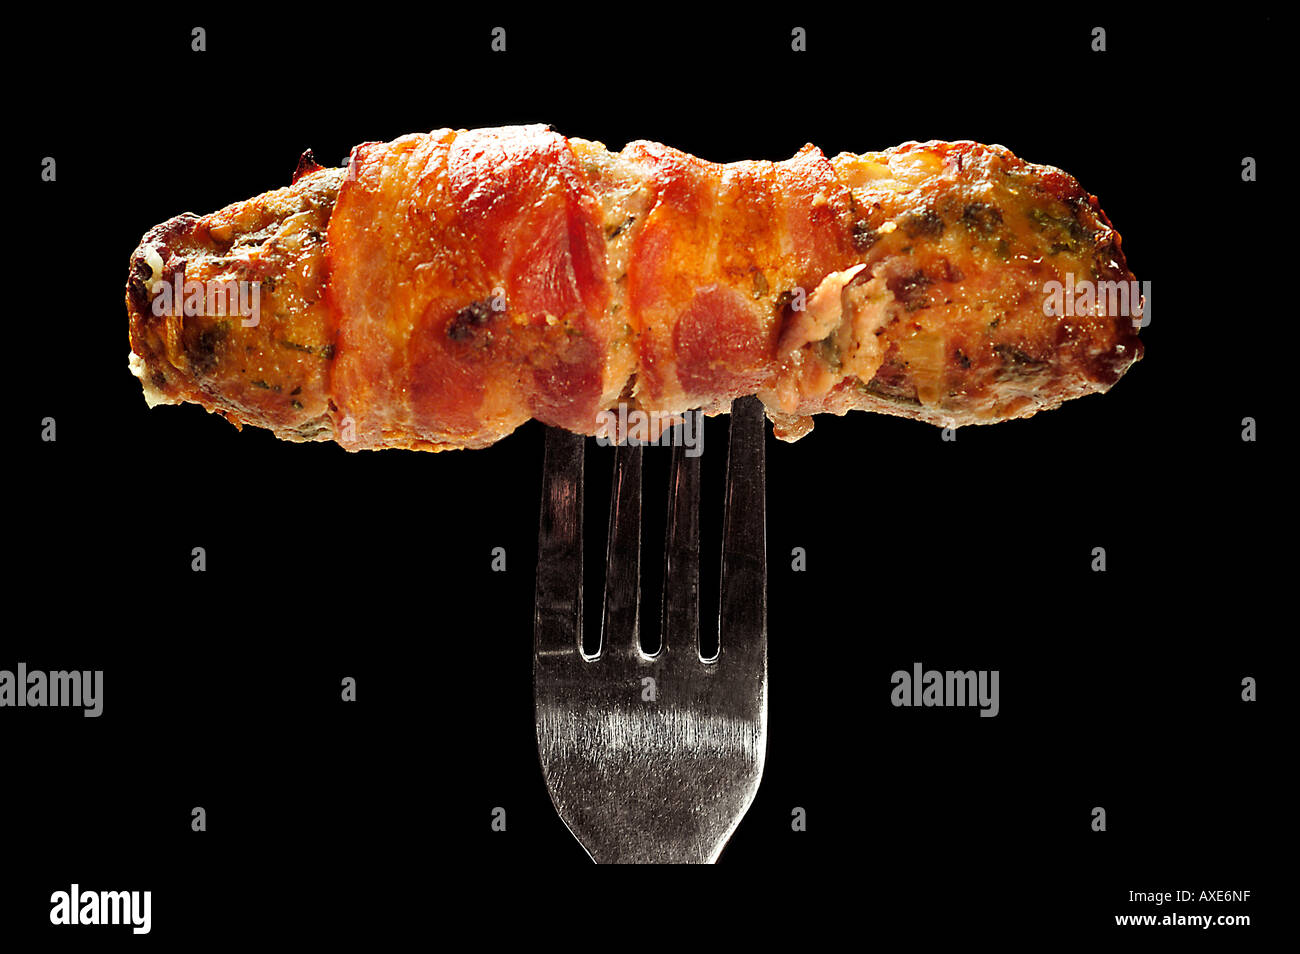 Pork sausage wrapped in bacon Stock Photo